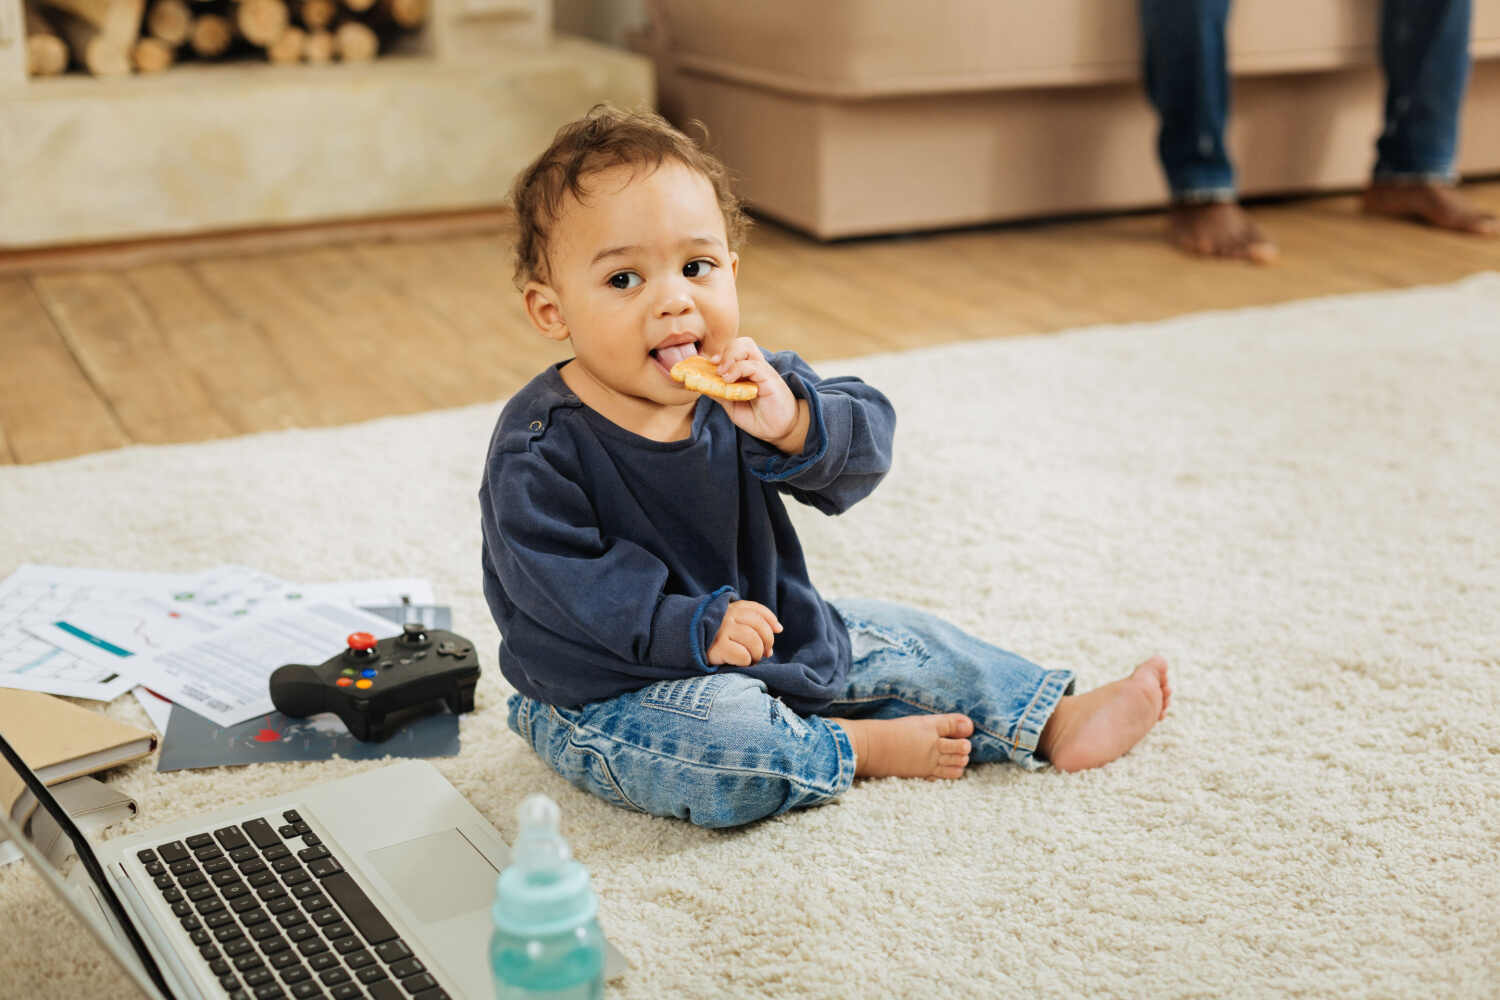 Threptin Biscuits For Babies – Are They Safe?